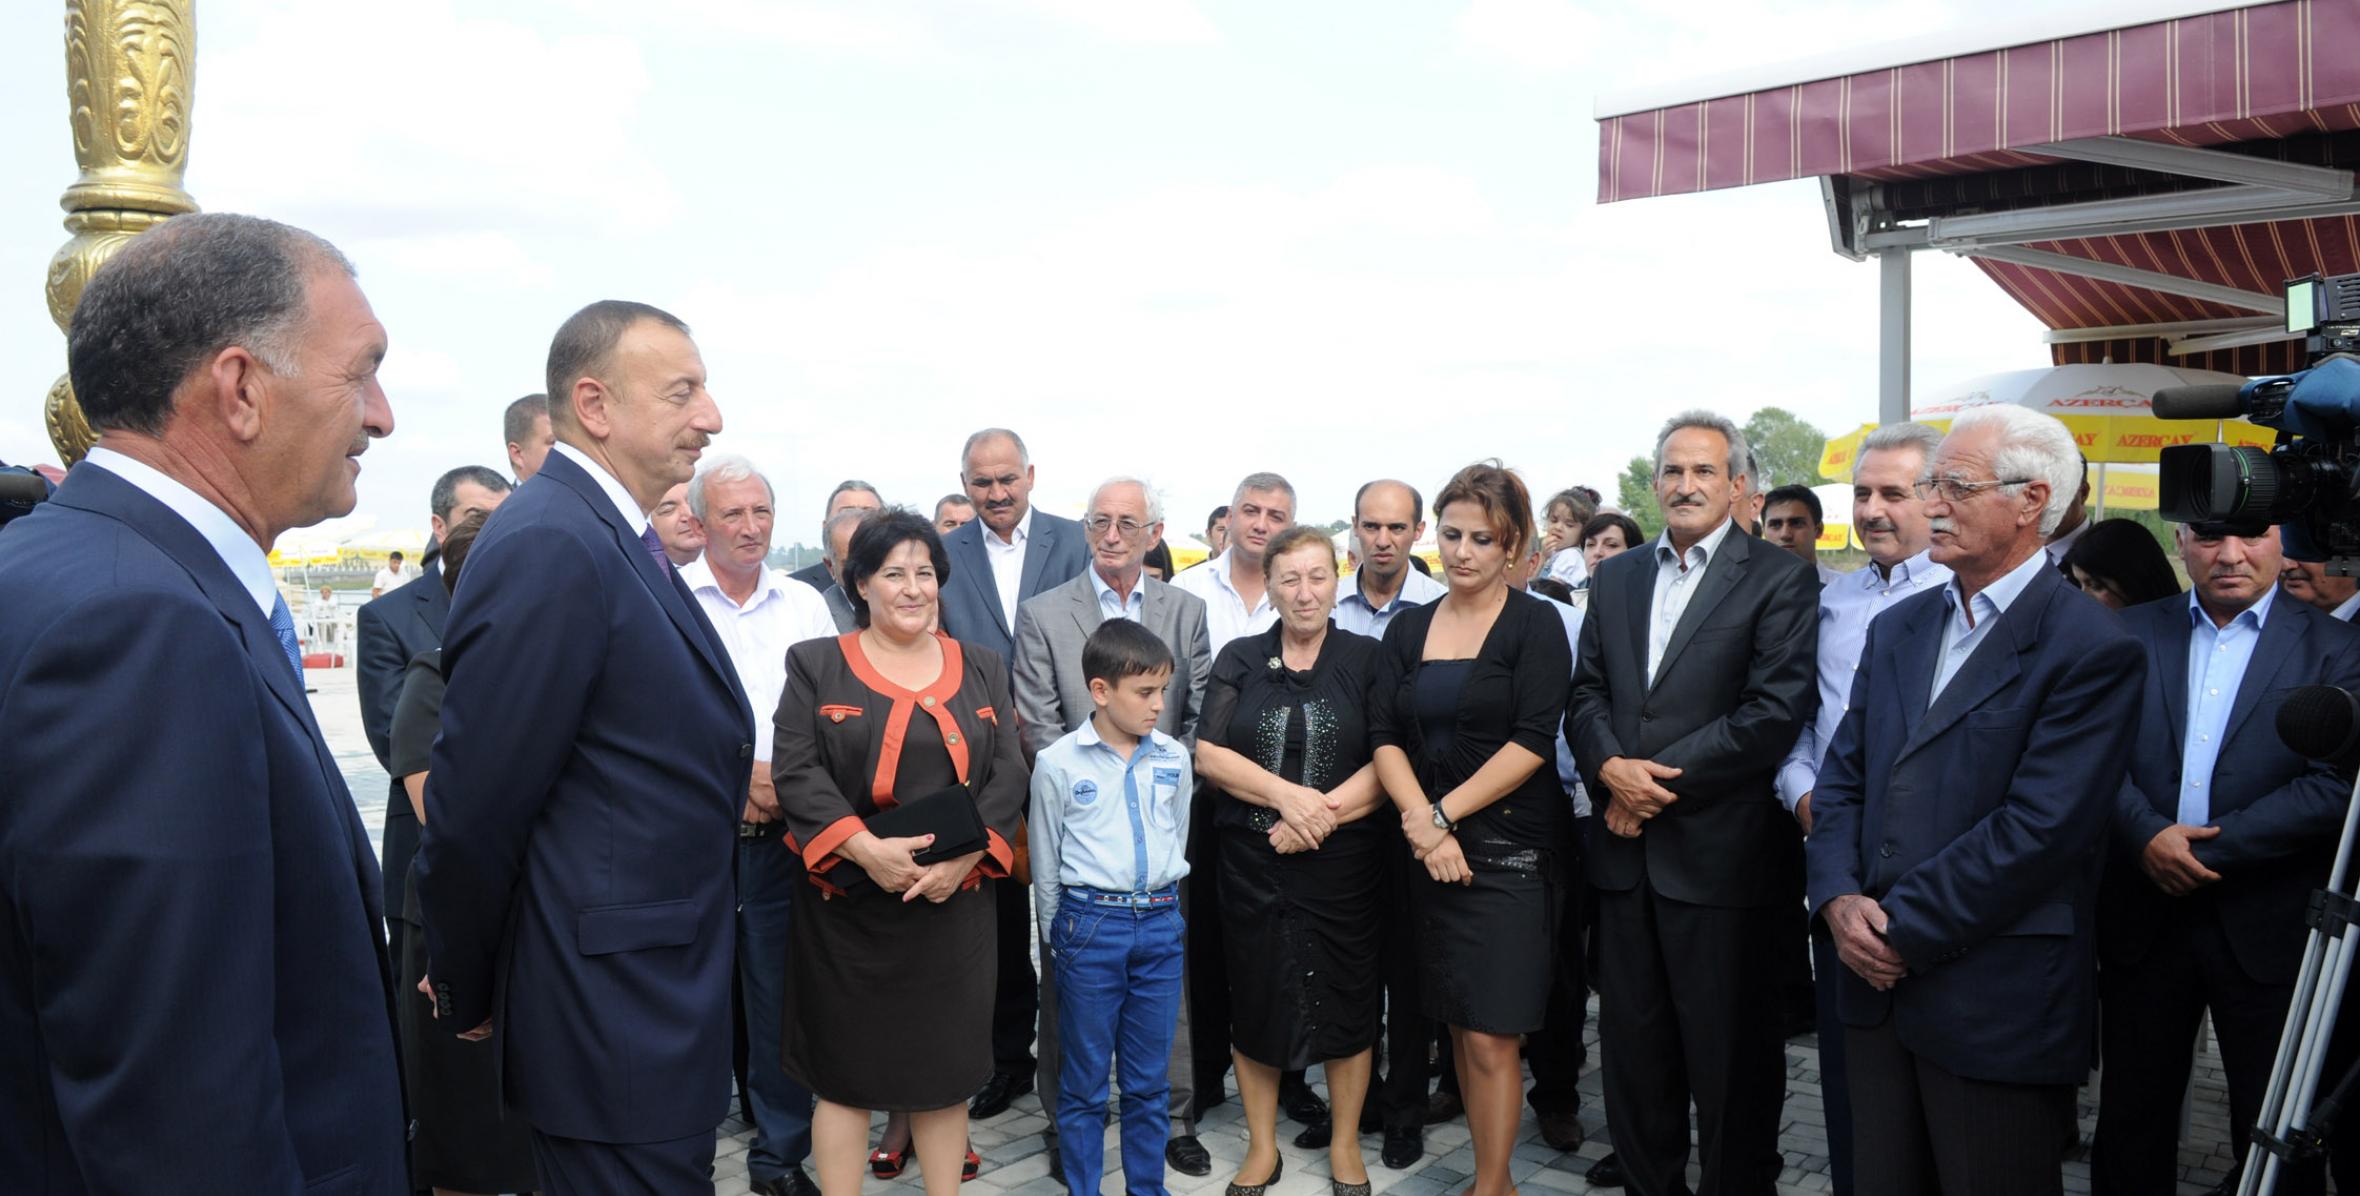 Ilham Aliyev reviewed progress of construction and reconstruction of the “Bulvar” recreation center on the banks of the River Kura in Yevlakh